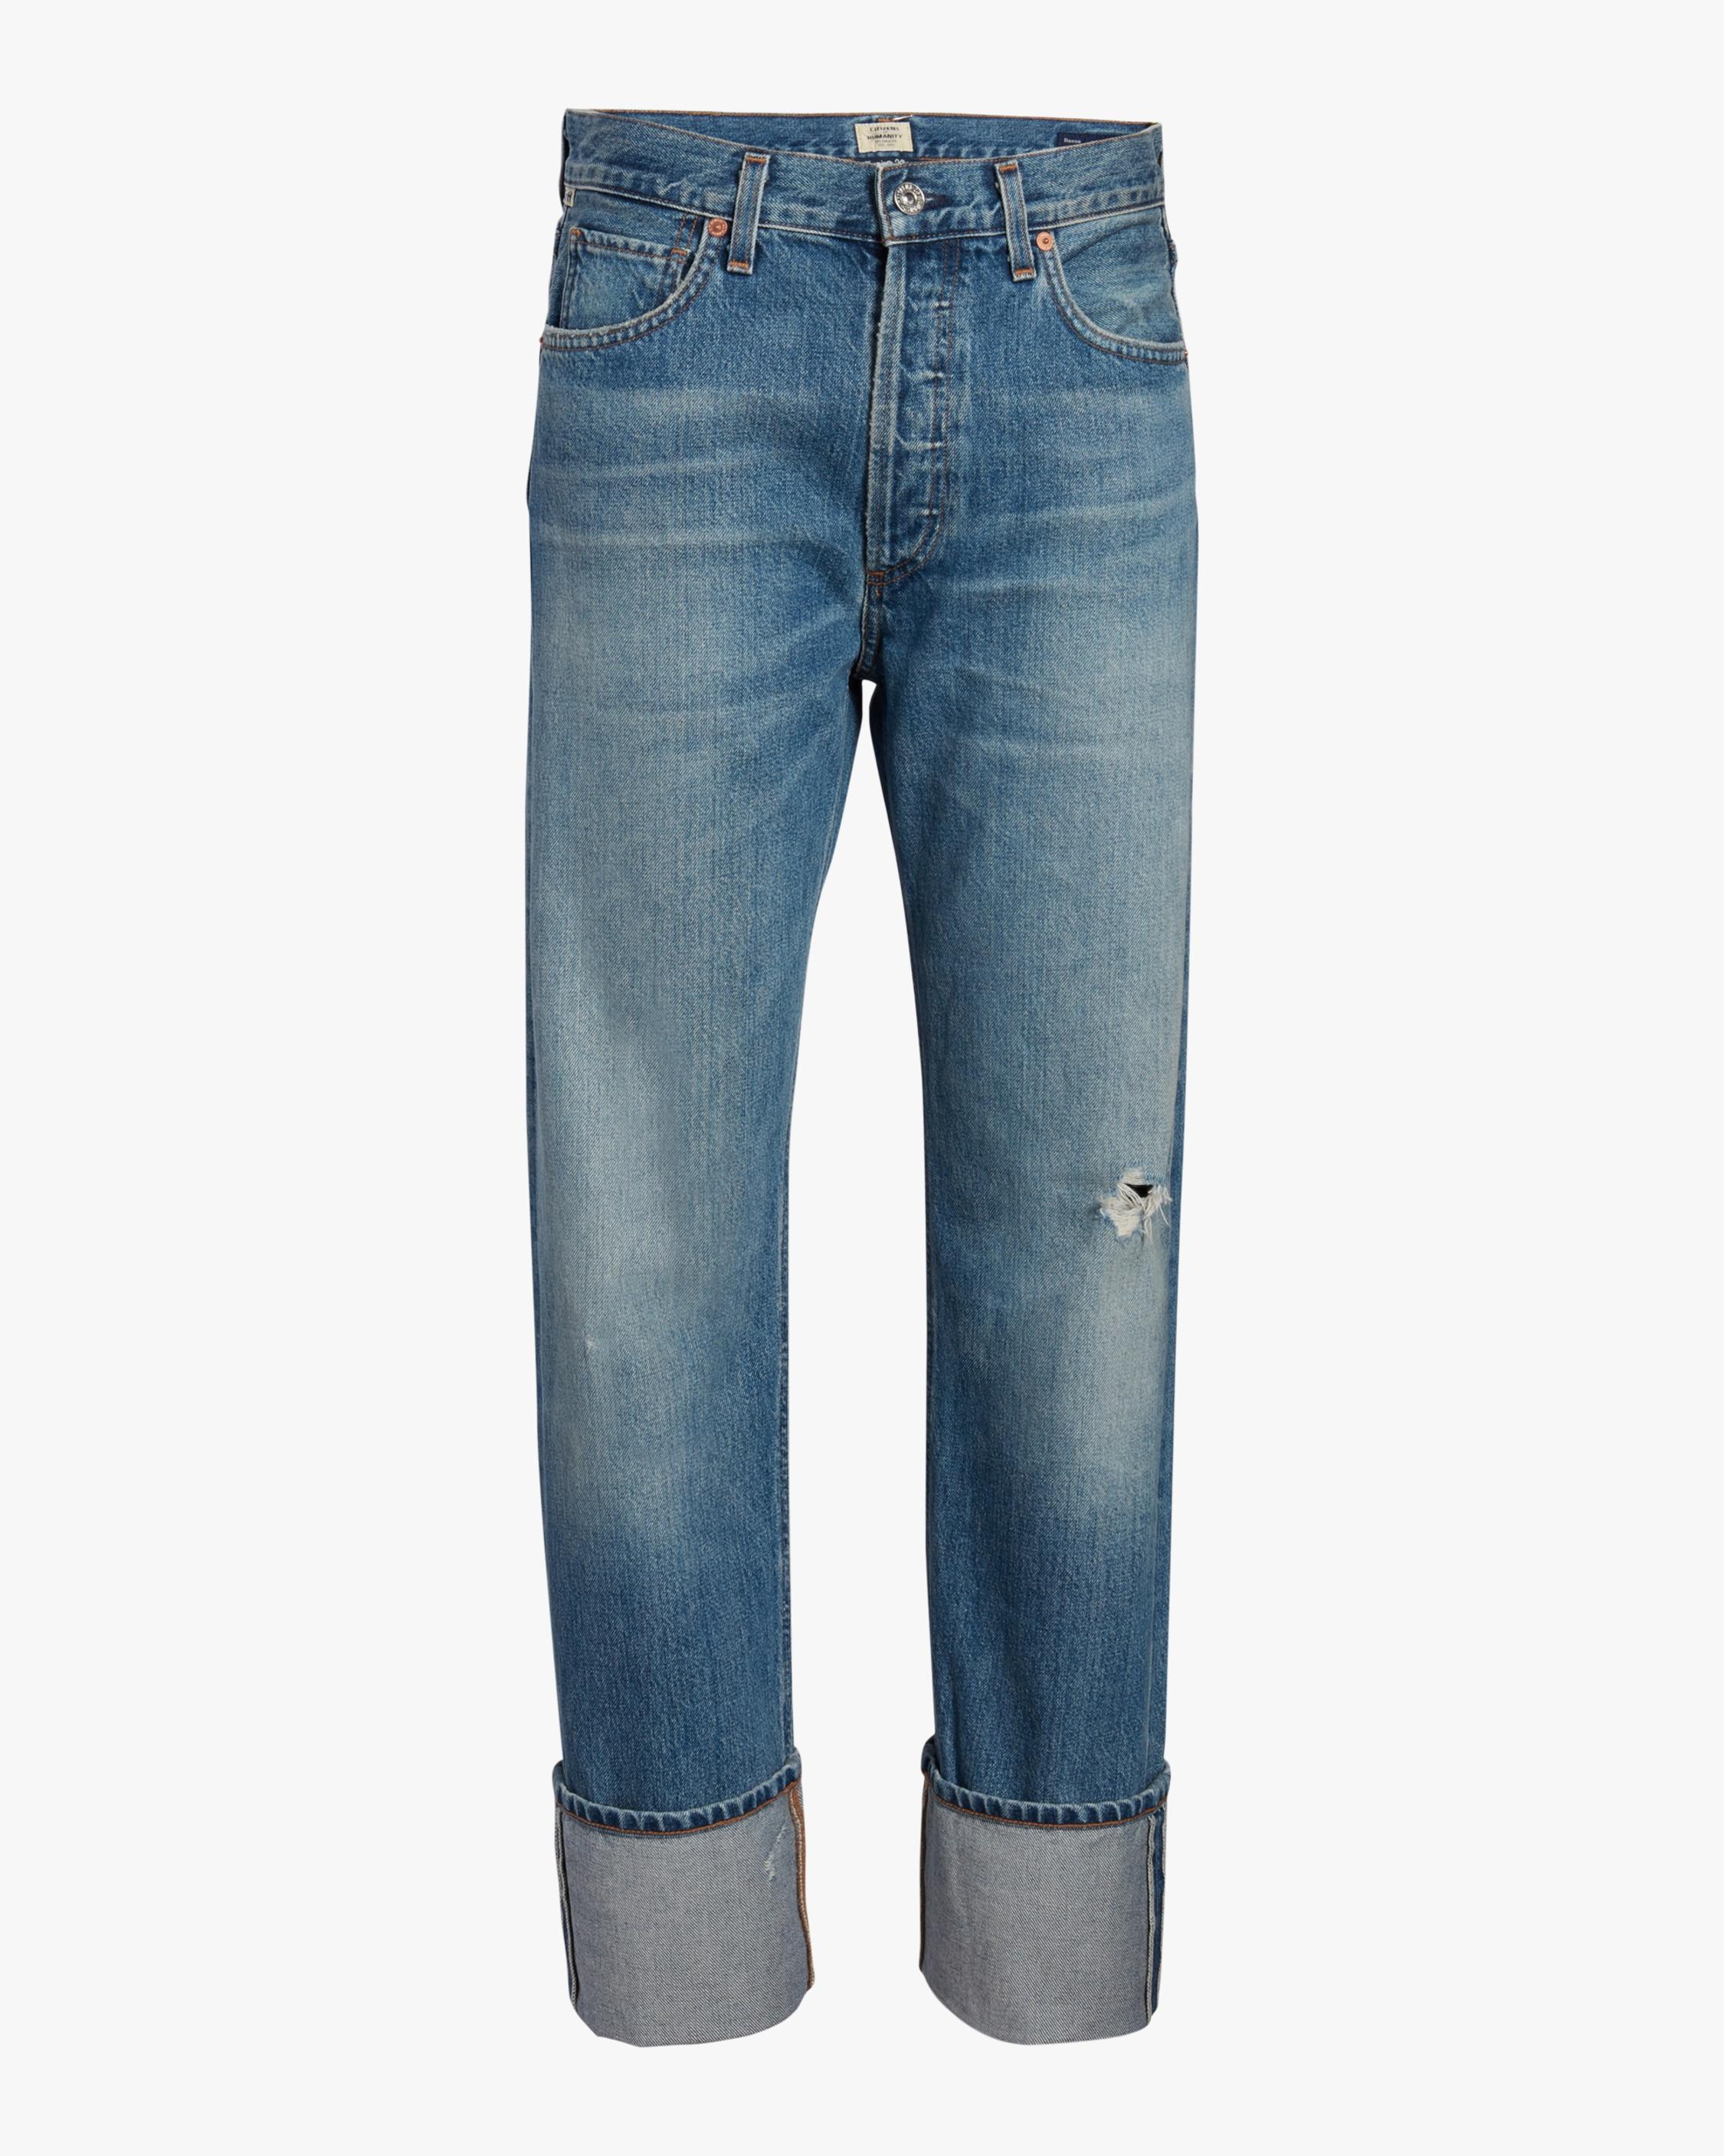 Citizens of Humanity Denim Reese Cuffed Straight Leg Jeans in Blue - Lyst